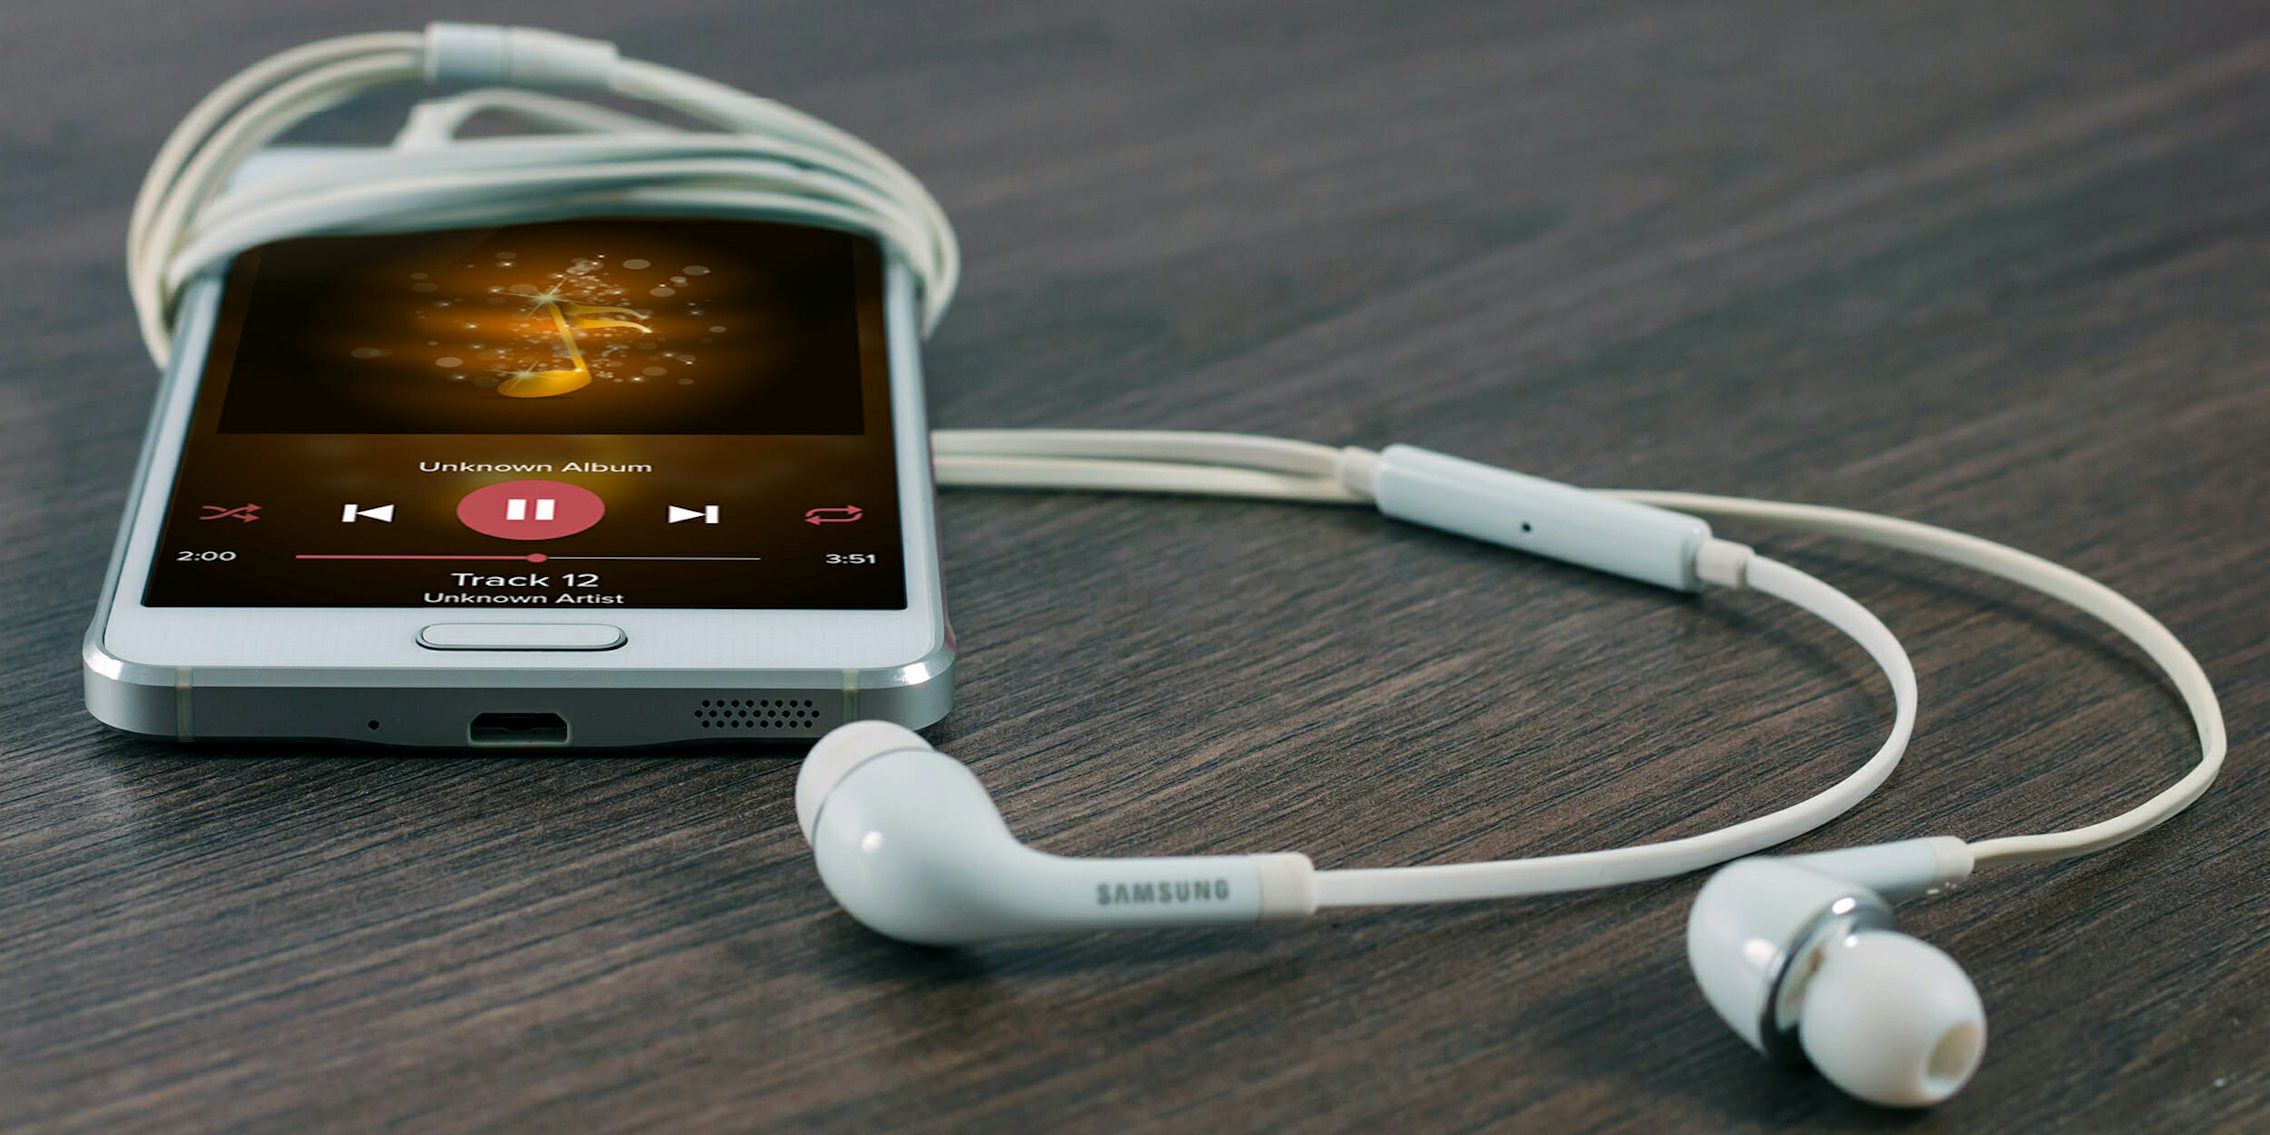 Pi music player app on Android phone with earbuds